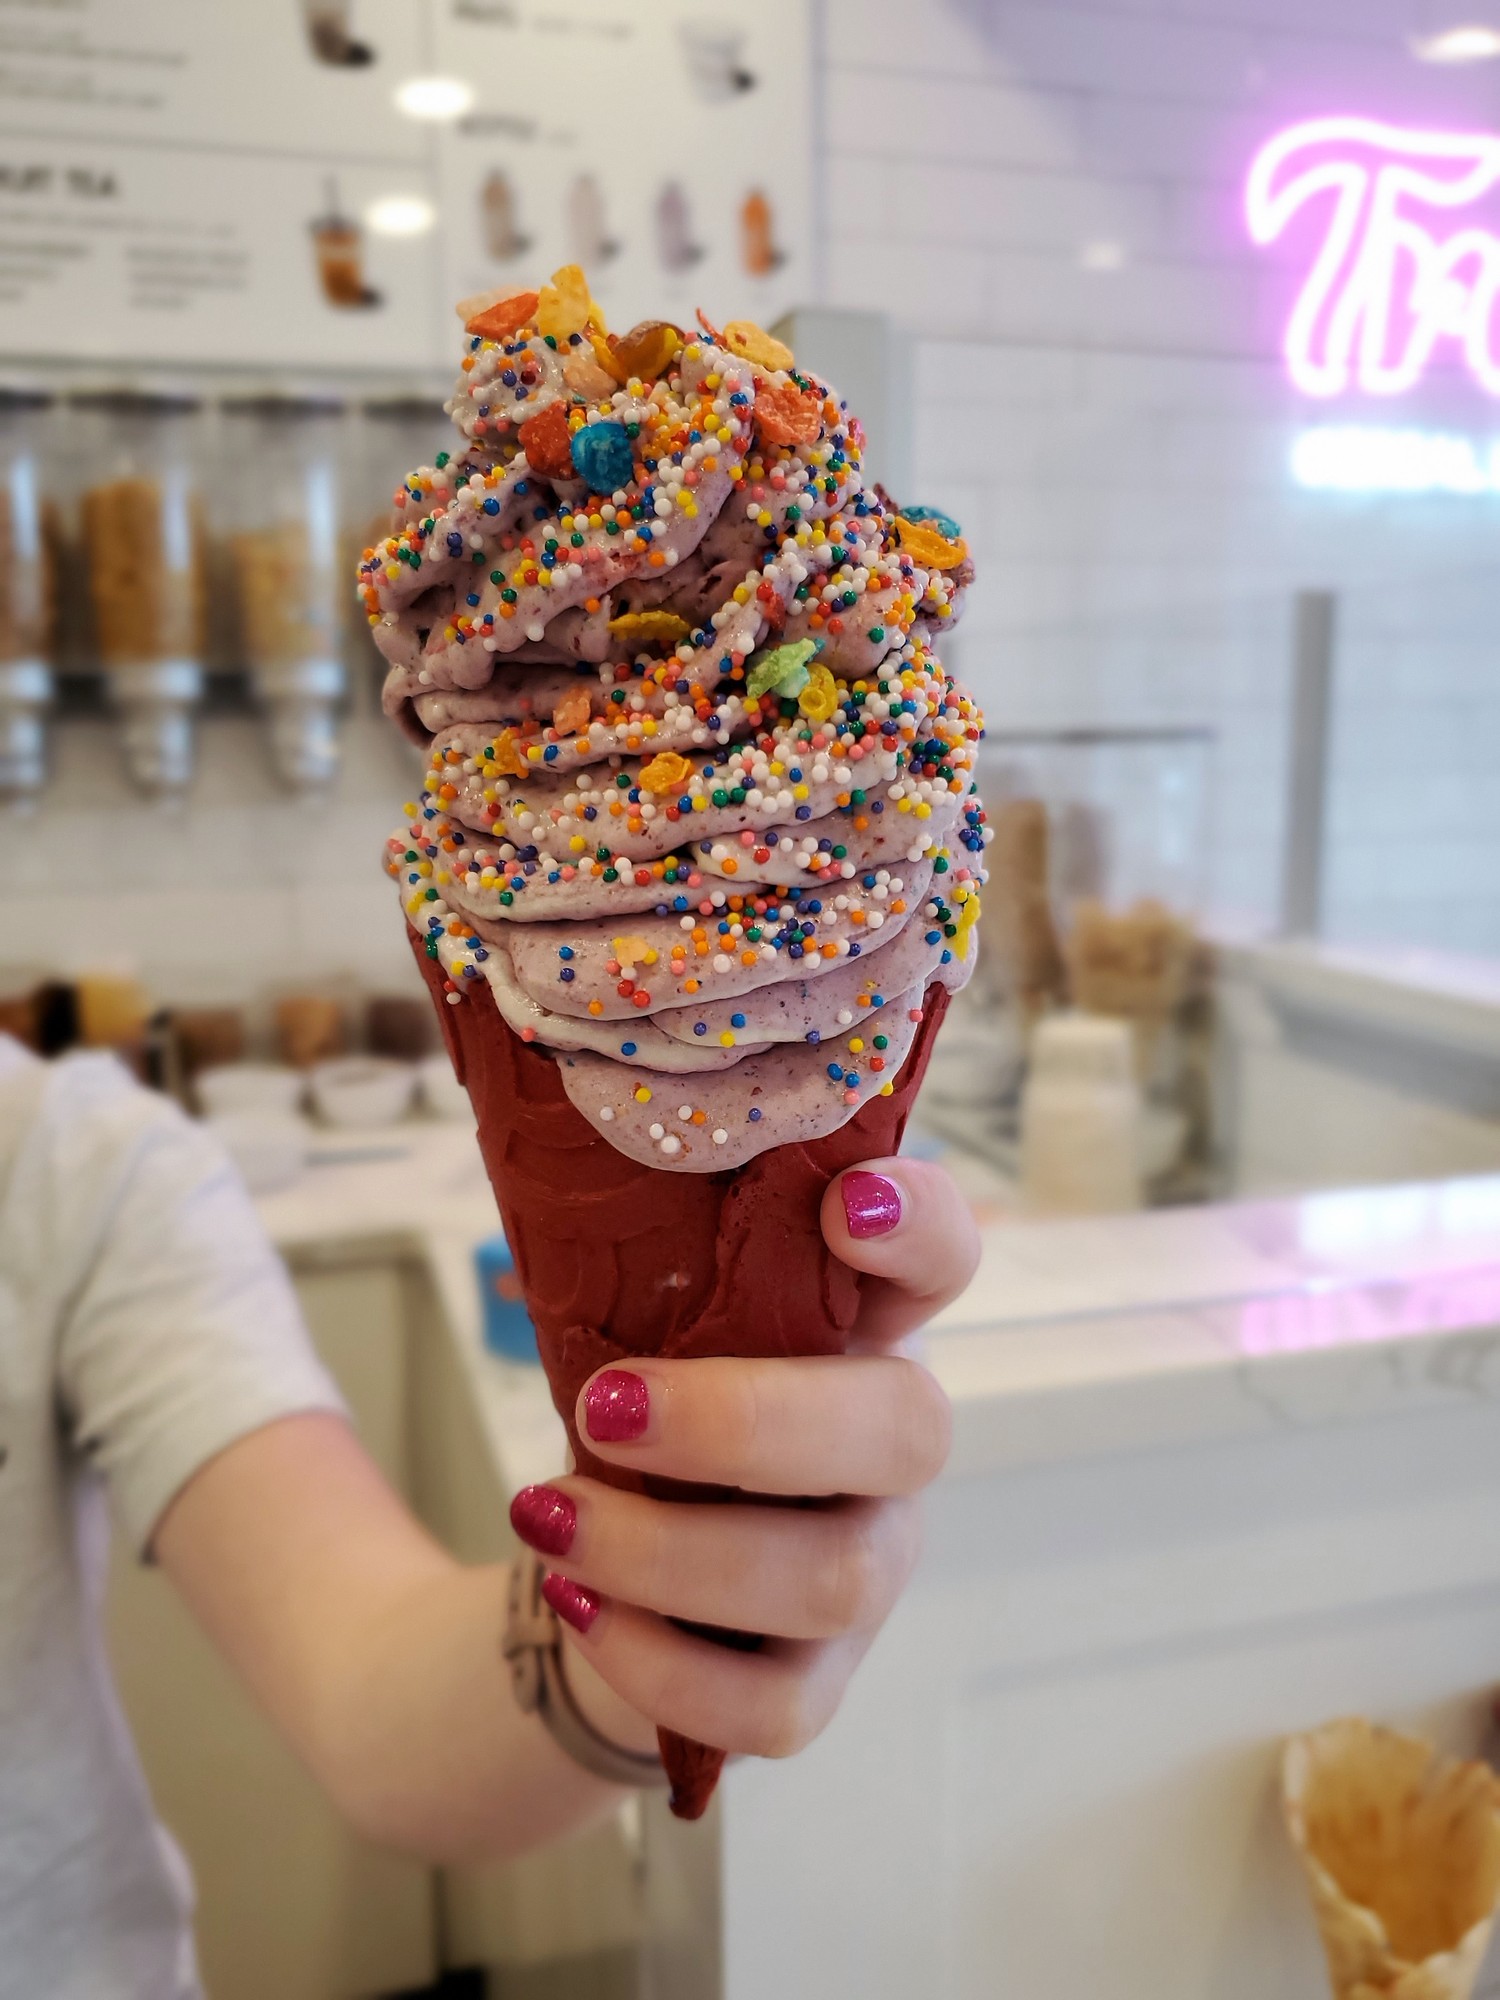 The ice cream at Treats is mixed with crushed cereal. The Berry Kiss is made with Fruity Pebbles, Froot Loops, Trix and berries.